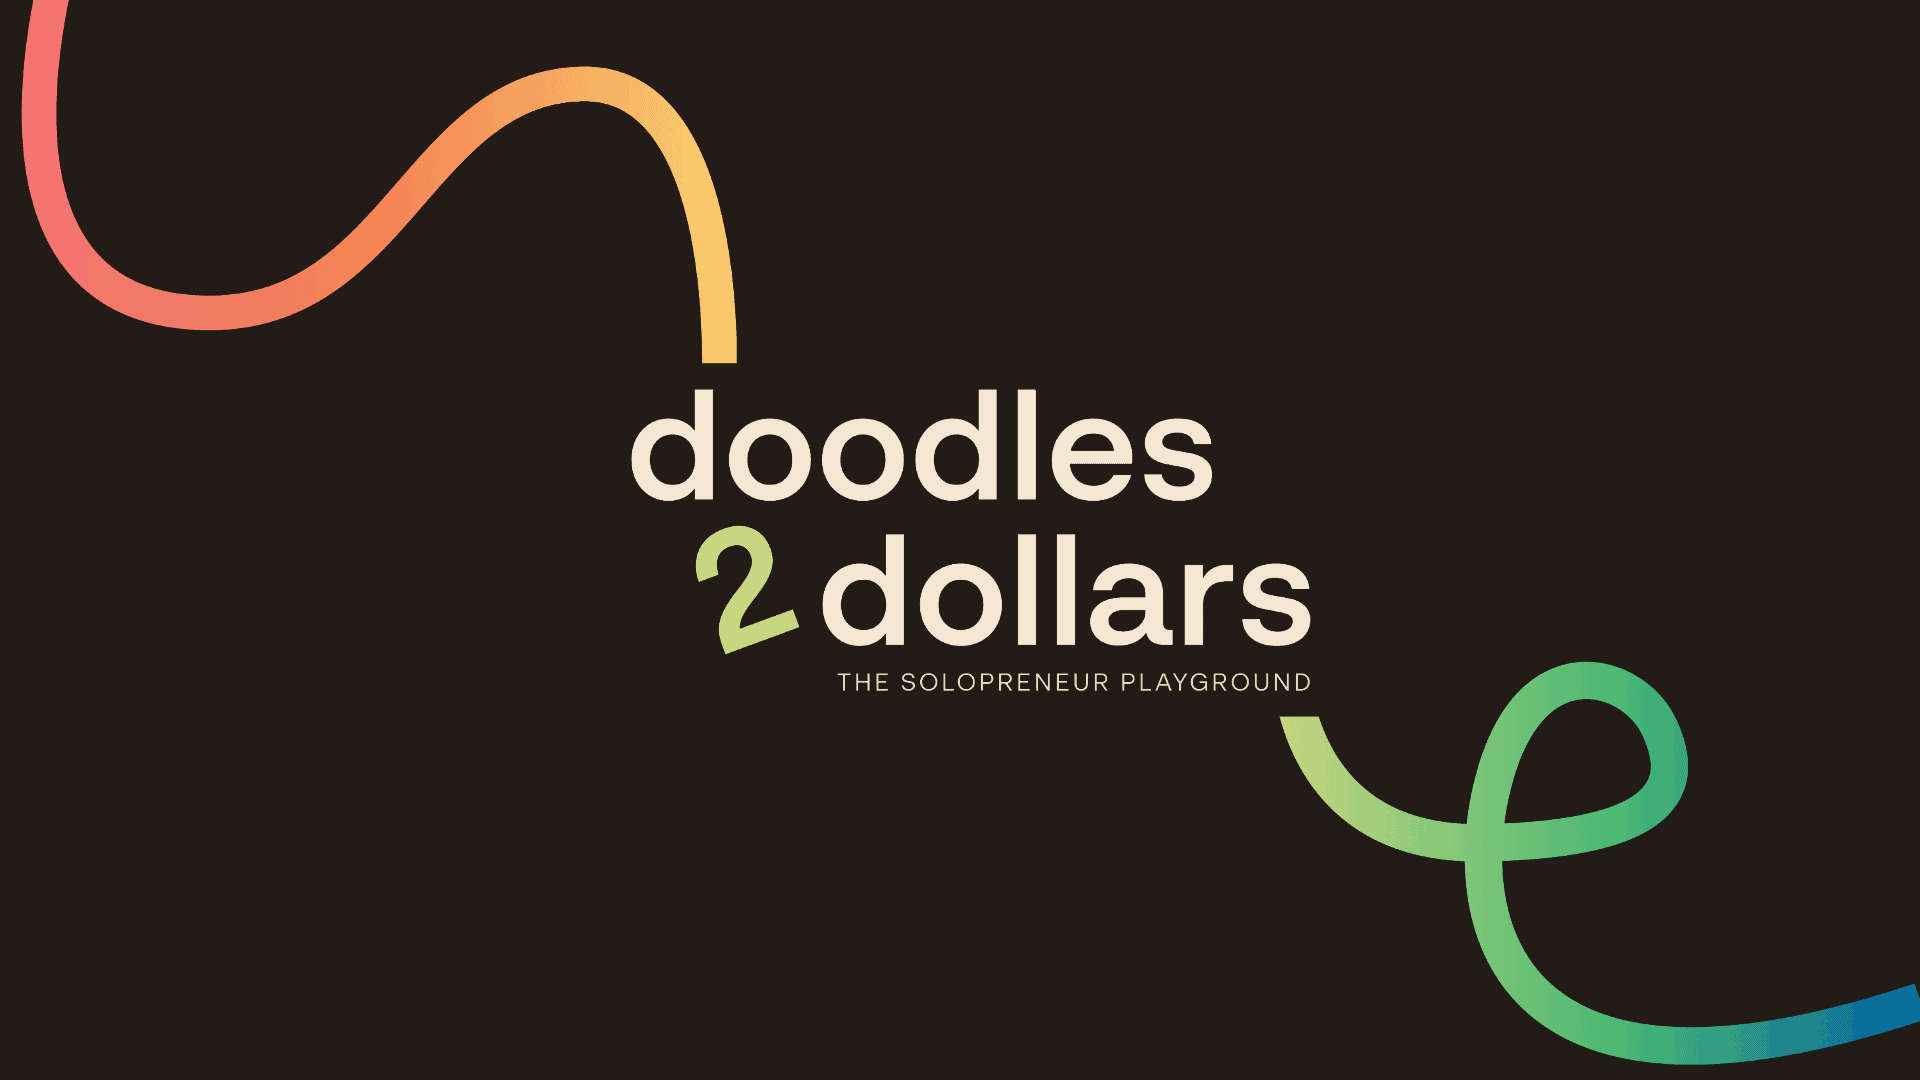 doodles 2 dollars podcast main page with logo